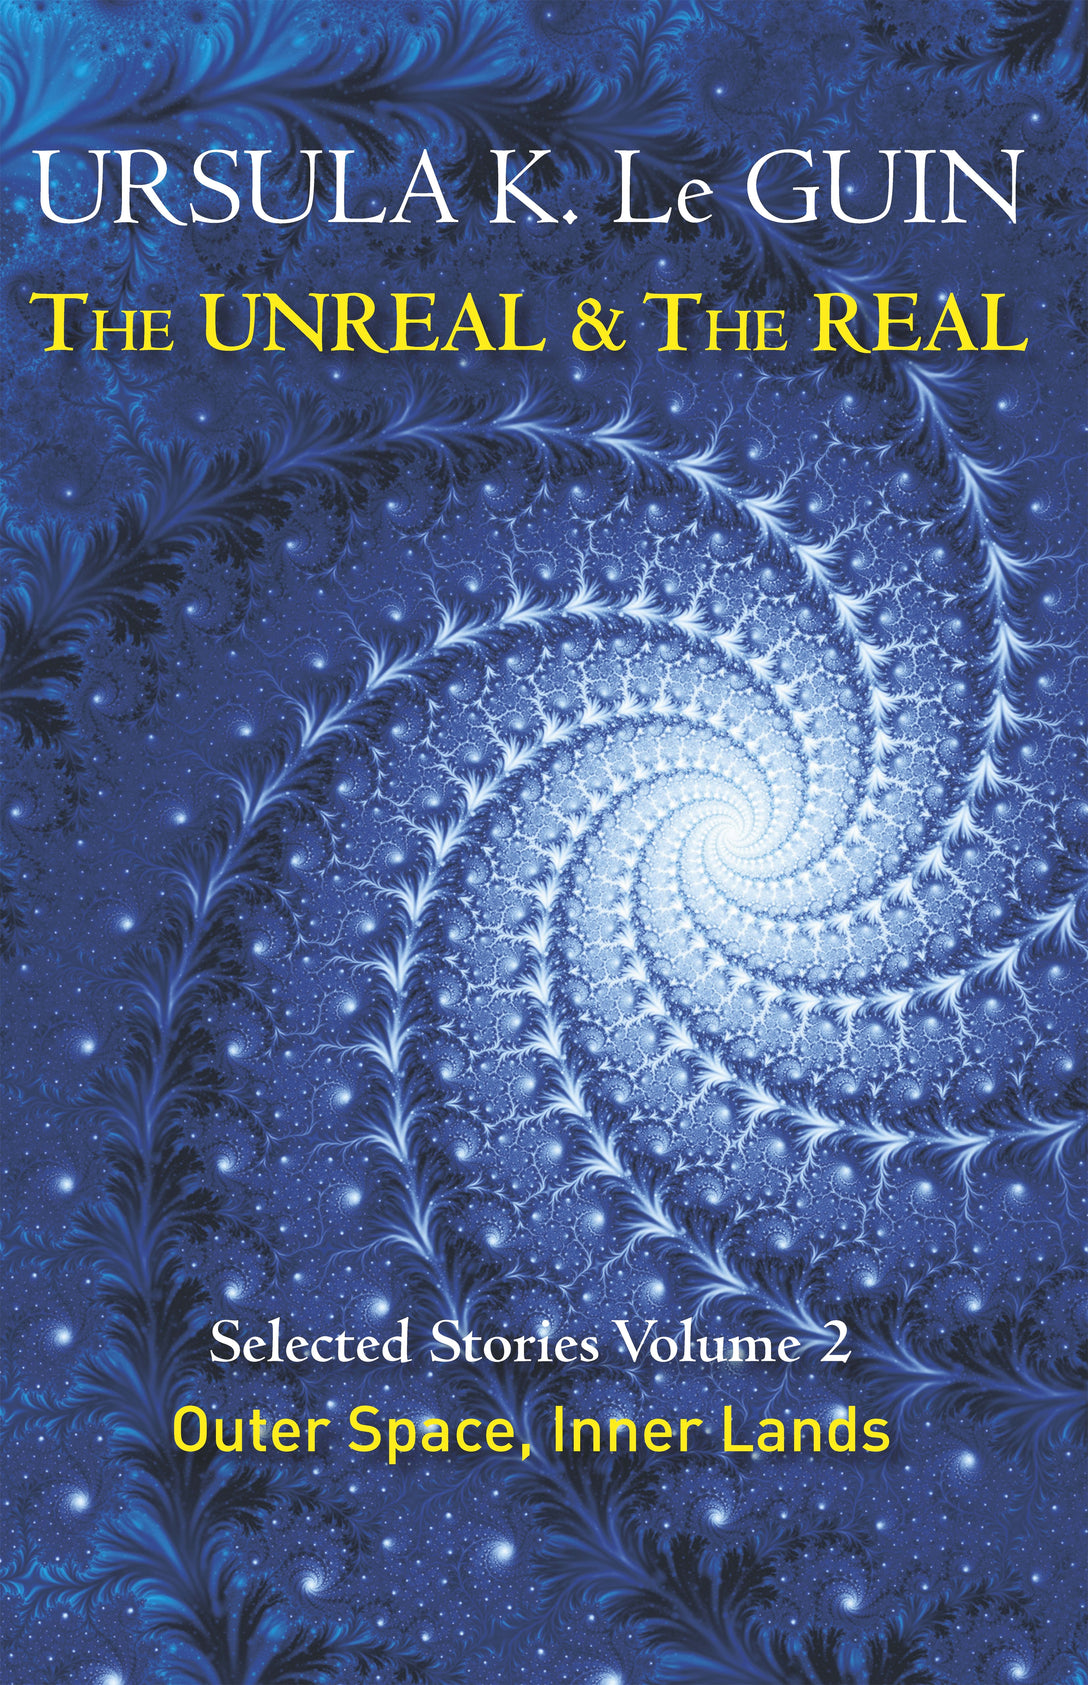 The Unreal and the Real Volume 2 by Ursula K. Le Guin